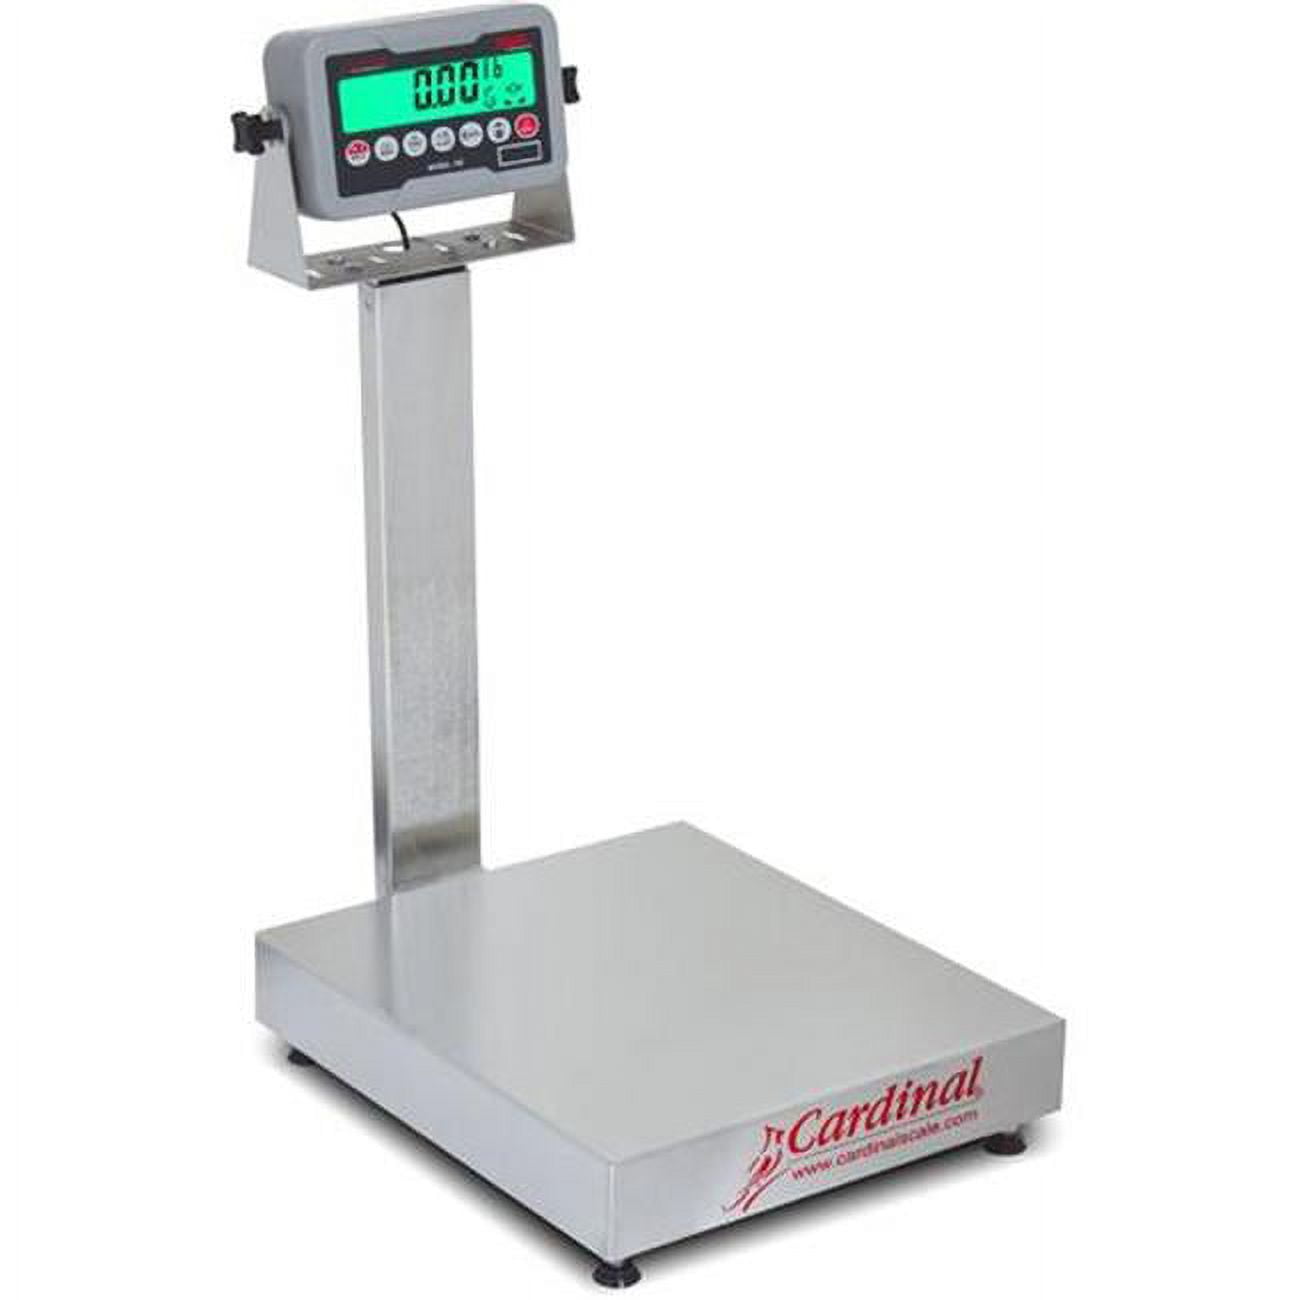 EB-15-185B 12 x 10 in. 15 lbs Stainless Steel 185B Indicator Electronic Bench Scale -  Cardinal & Detecto